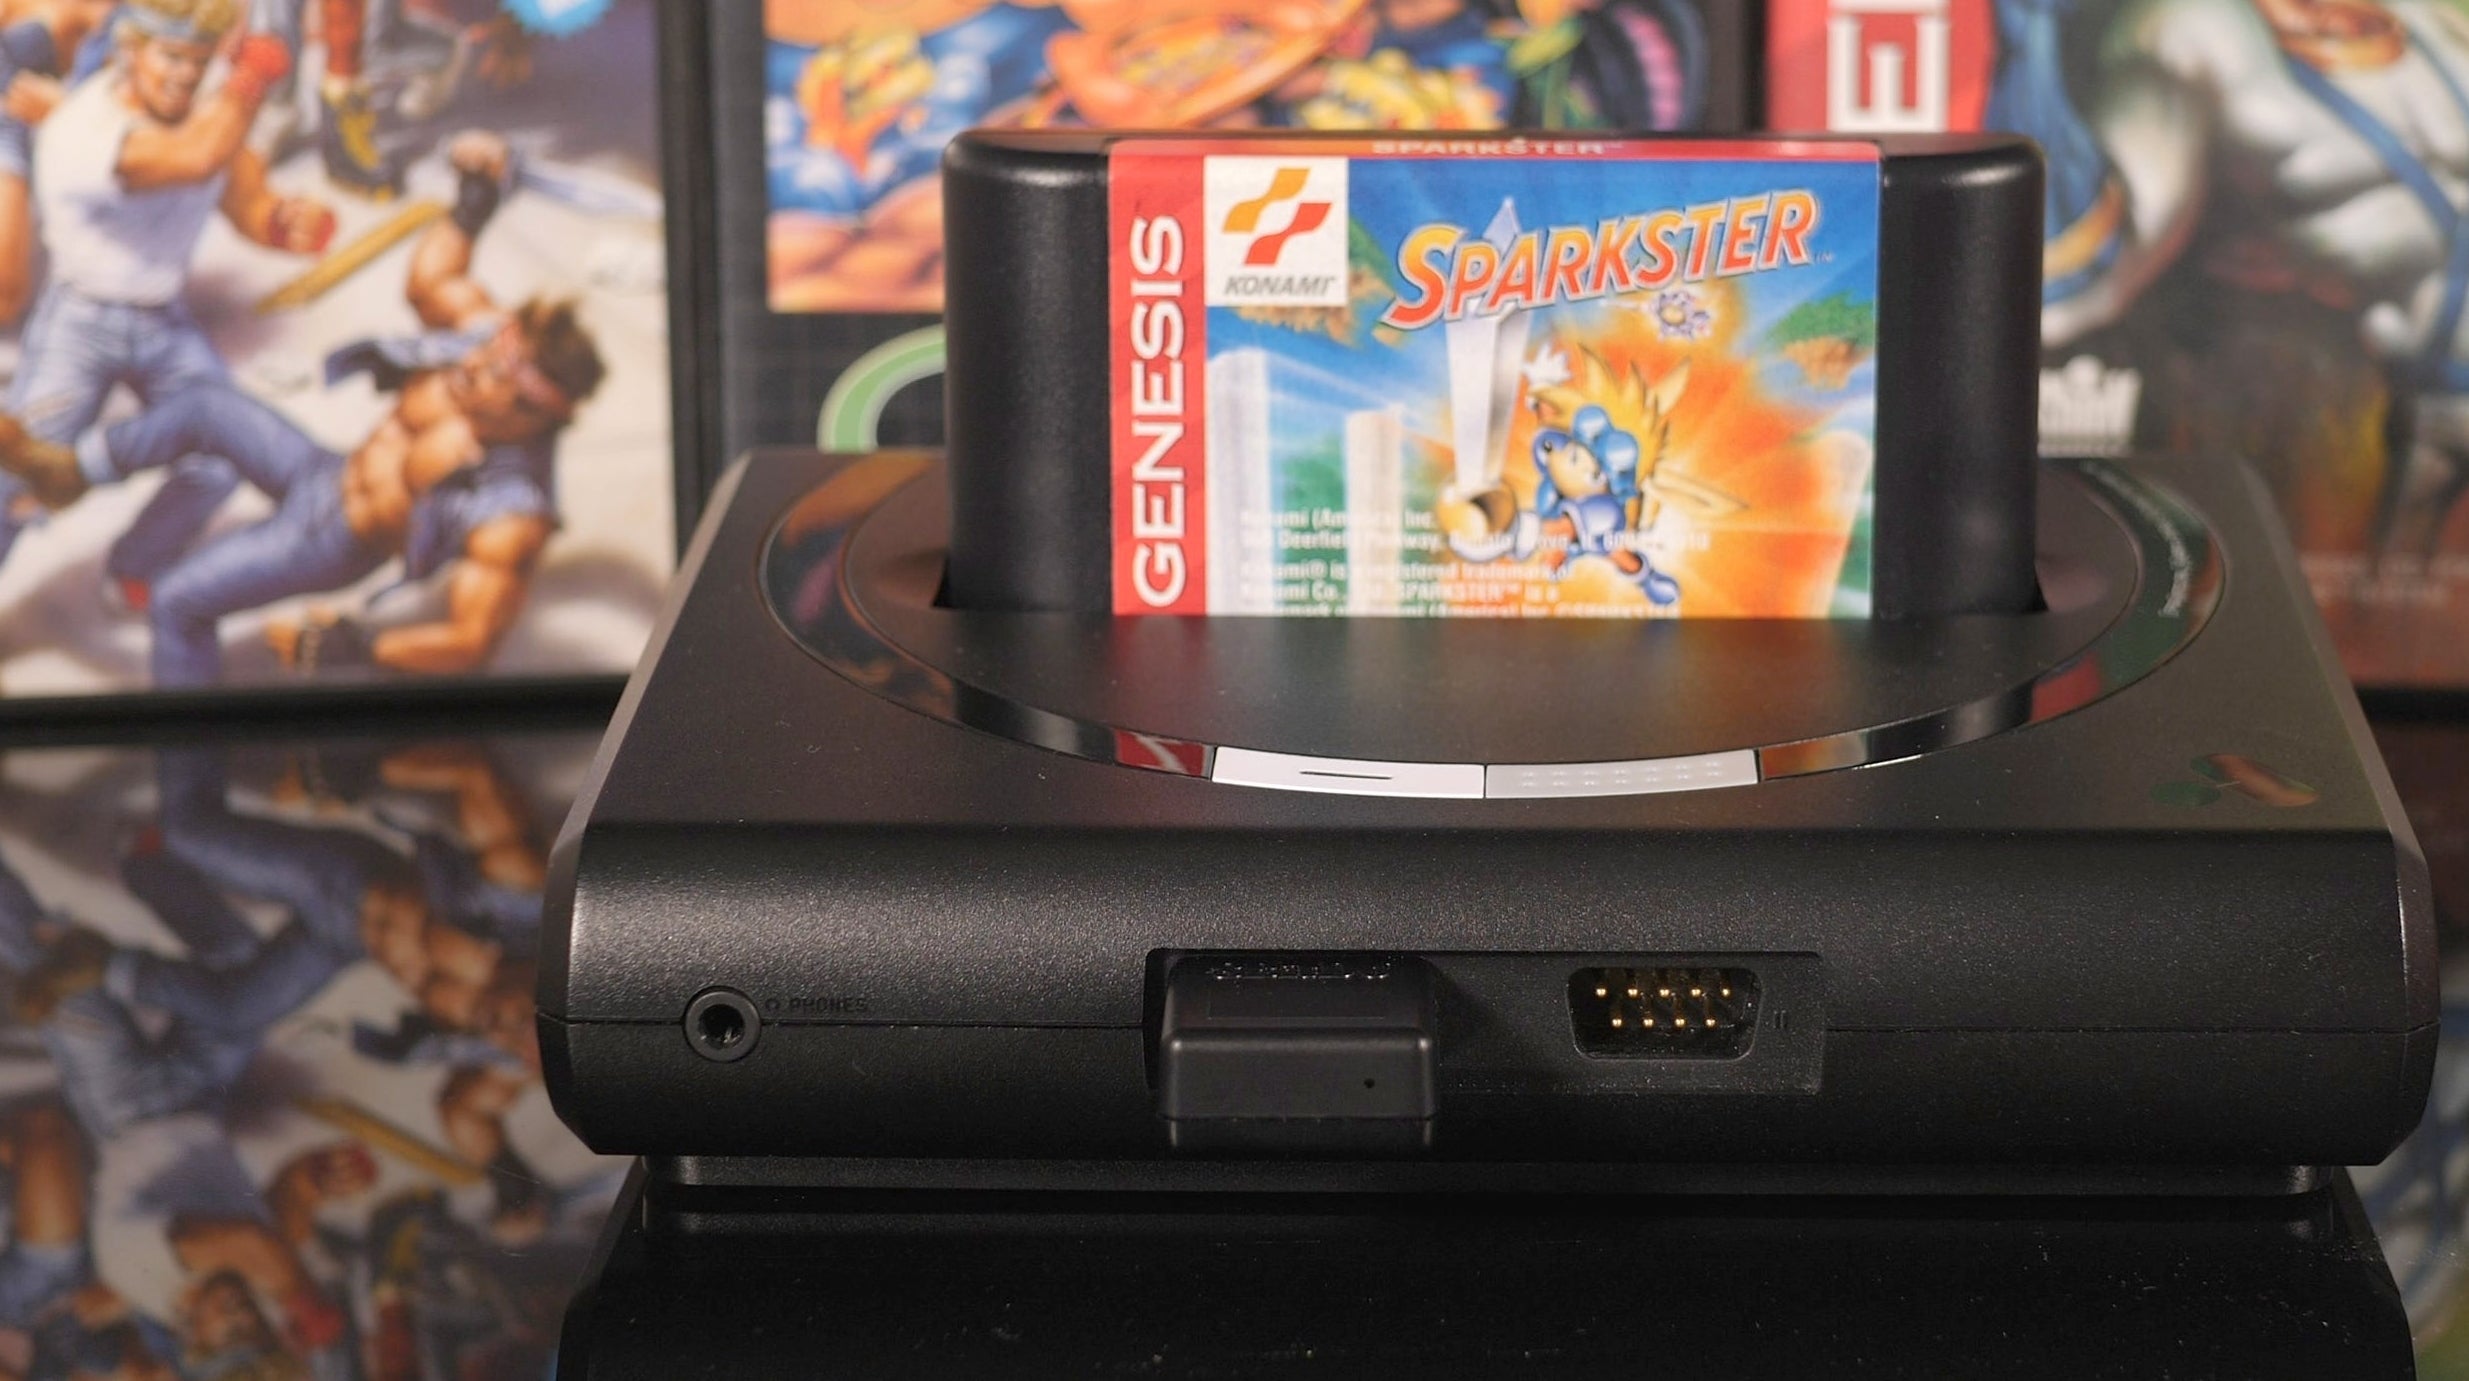 Analogue Mega Sg review: the best Mega Drive clone for flat panel 